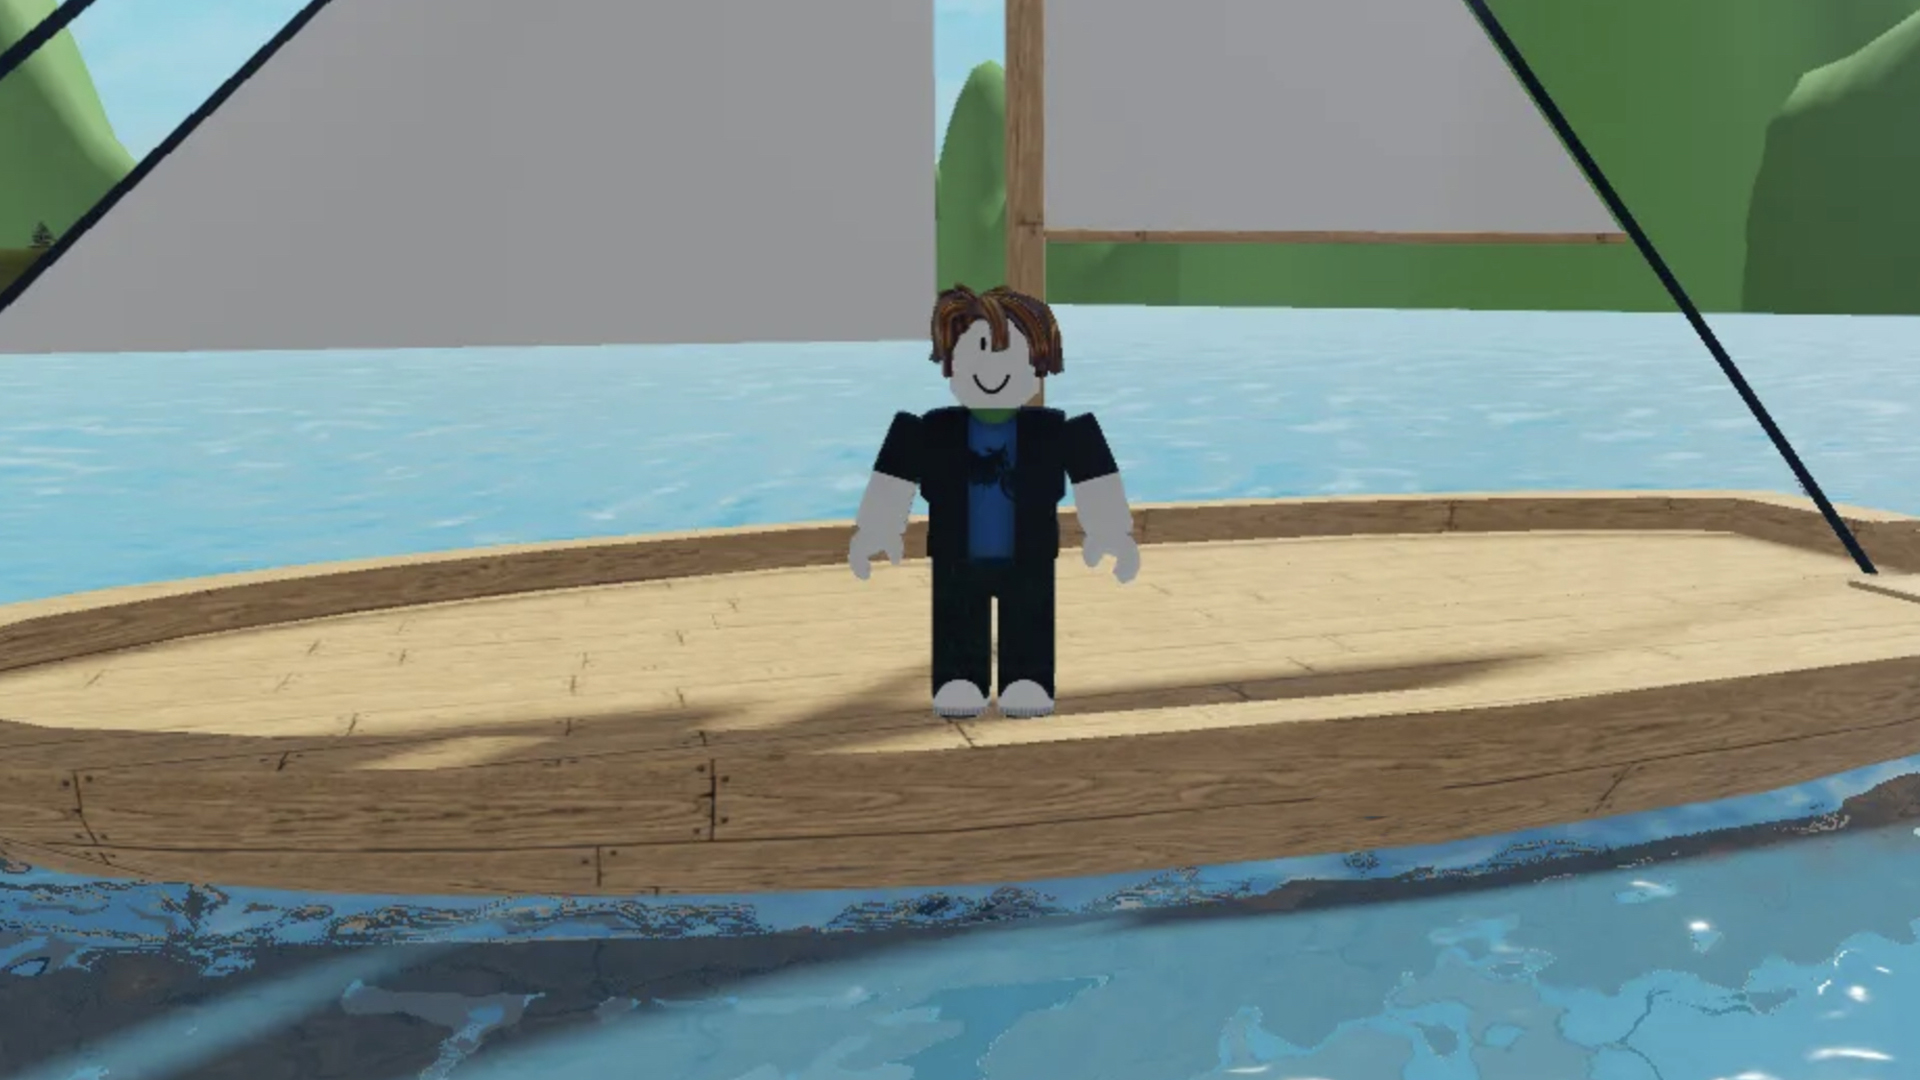 A scene from the Roblox game, Sharkbite 